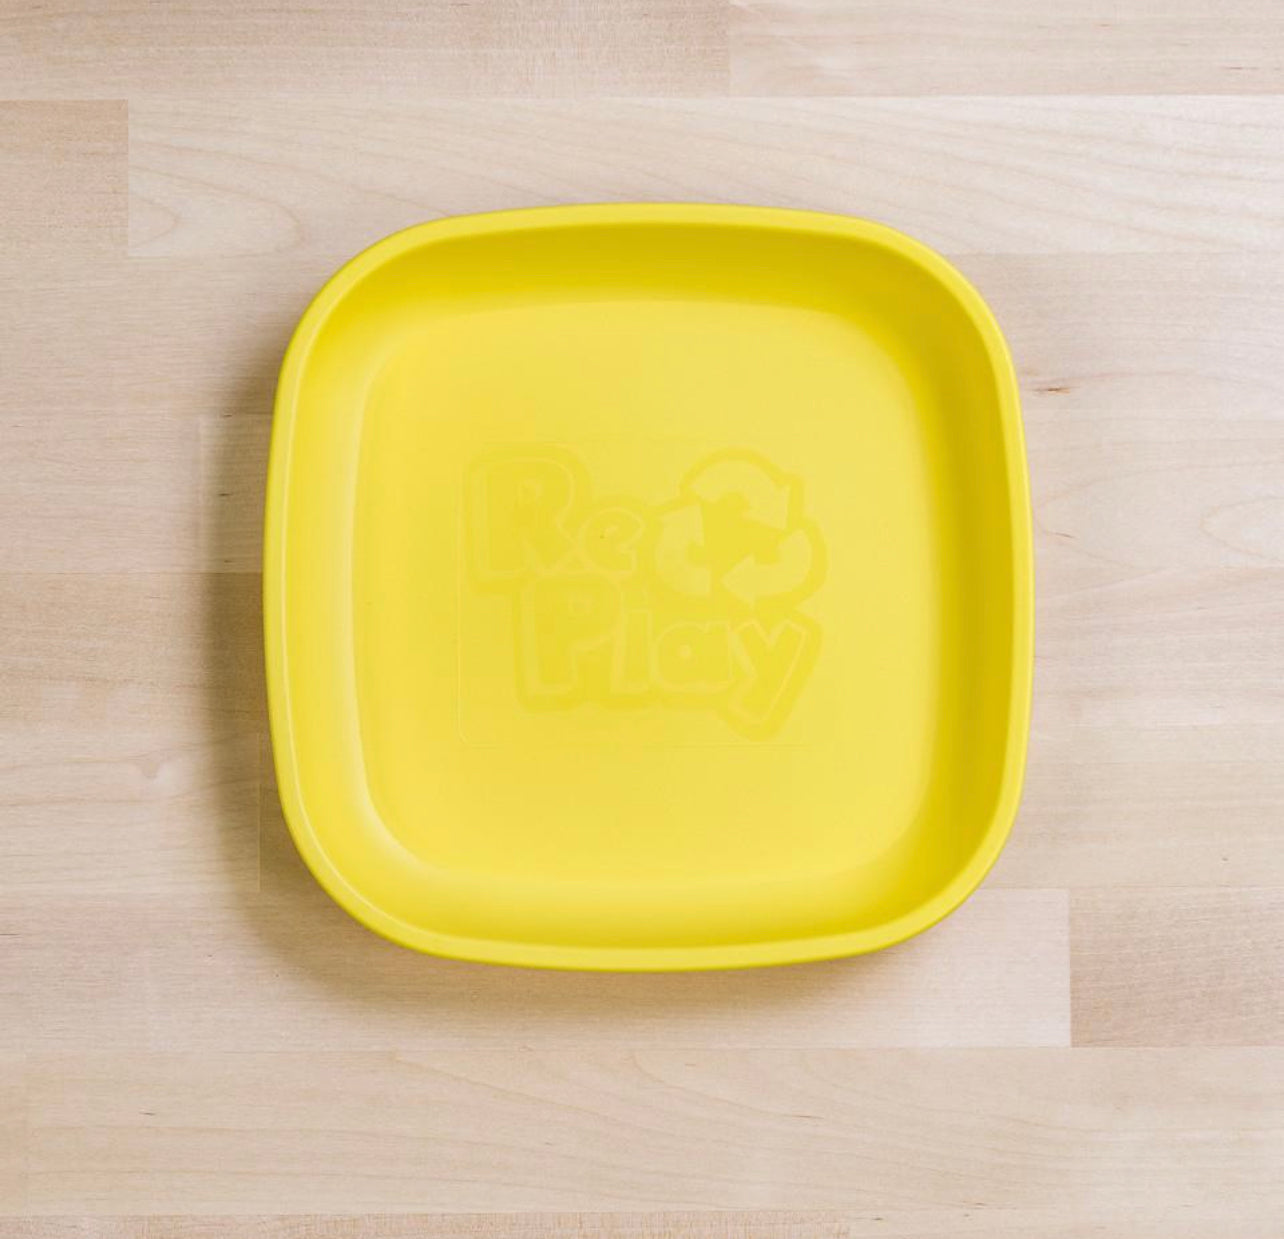 Re-Play Flat Plate - Yellow